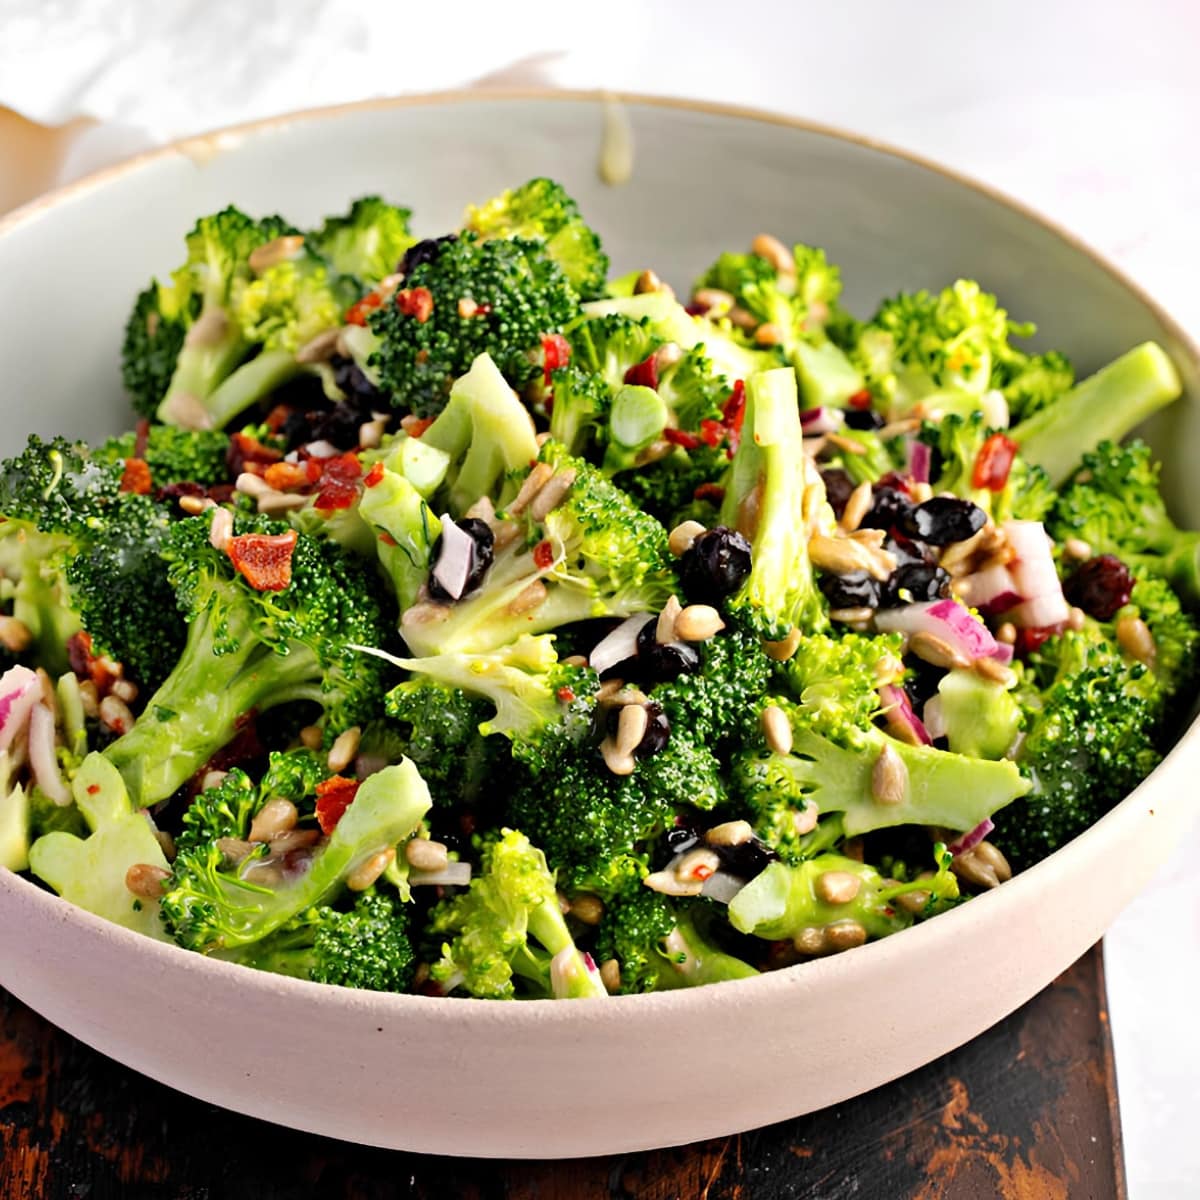 A Bowl of Broccoli Salad with Bacon, Raisins, Sunflower Seeds, and Creamy Dressing